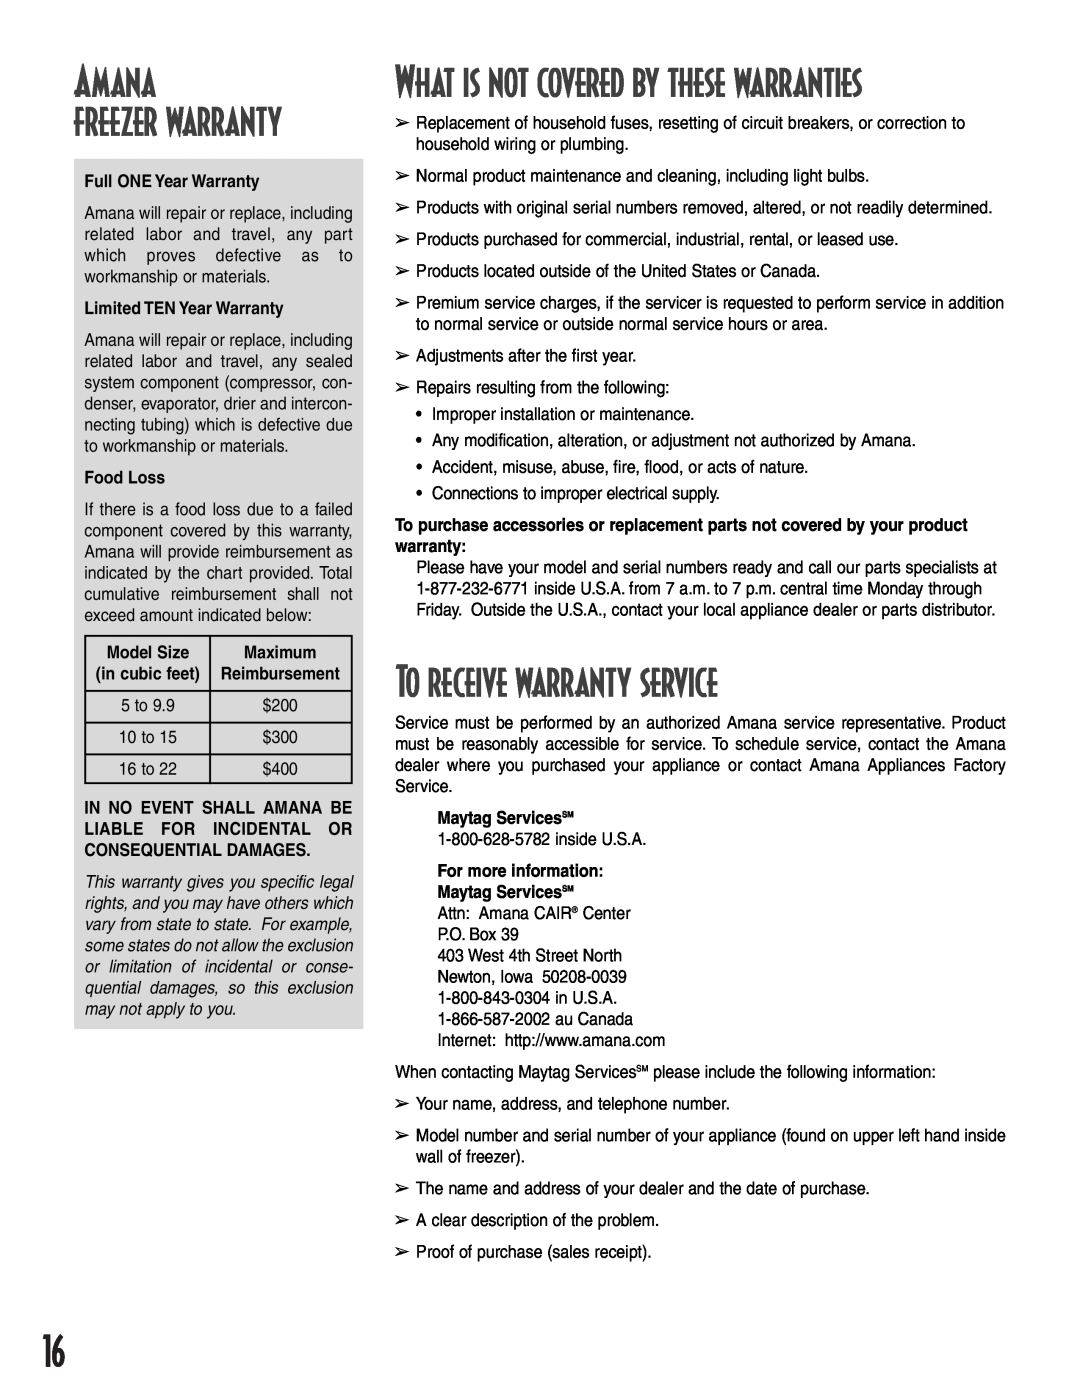 Amana 1-82034-002 Amana freezer warranty, To receive warranty service, What is not covered by these warranties, Food Loss 